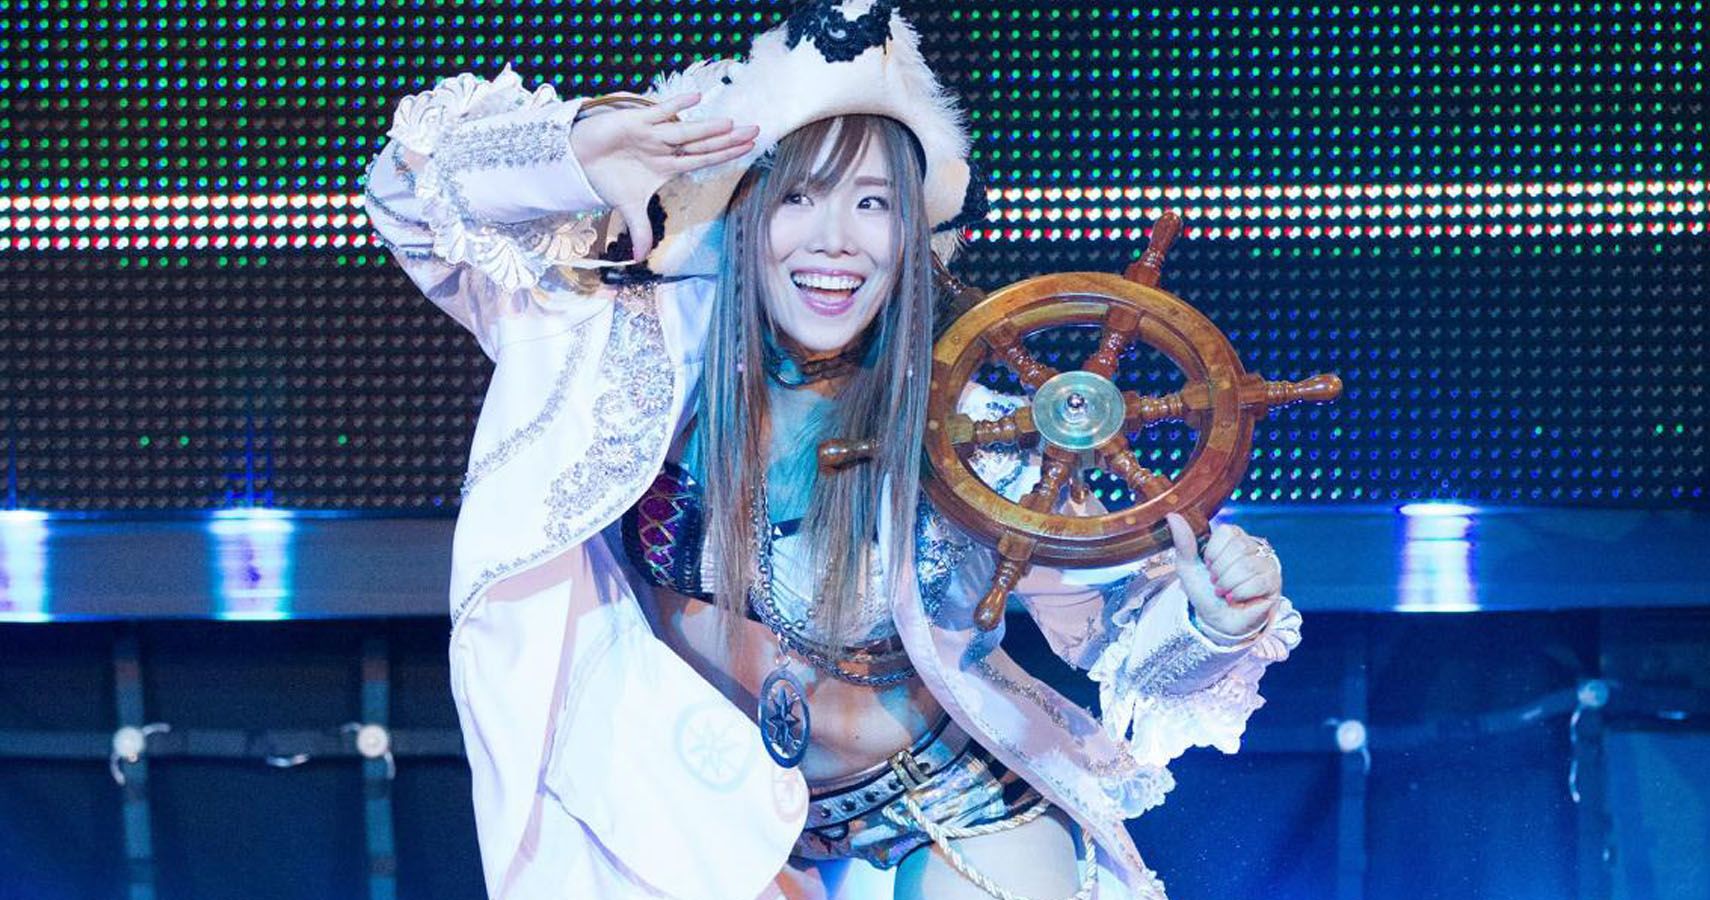 At the most recent NXT event, Kairi Sane got a send-off from the fans at Fu...